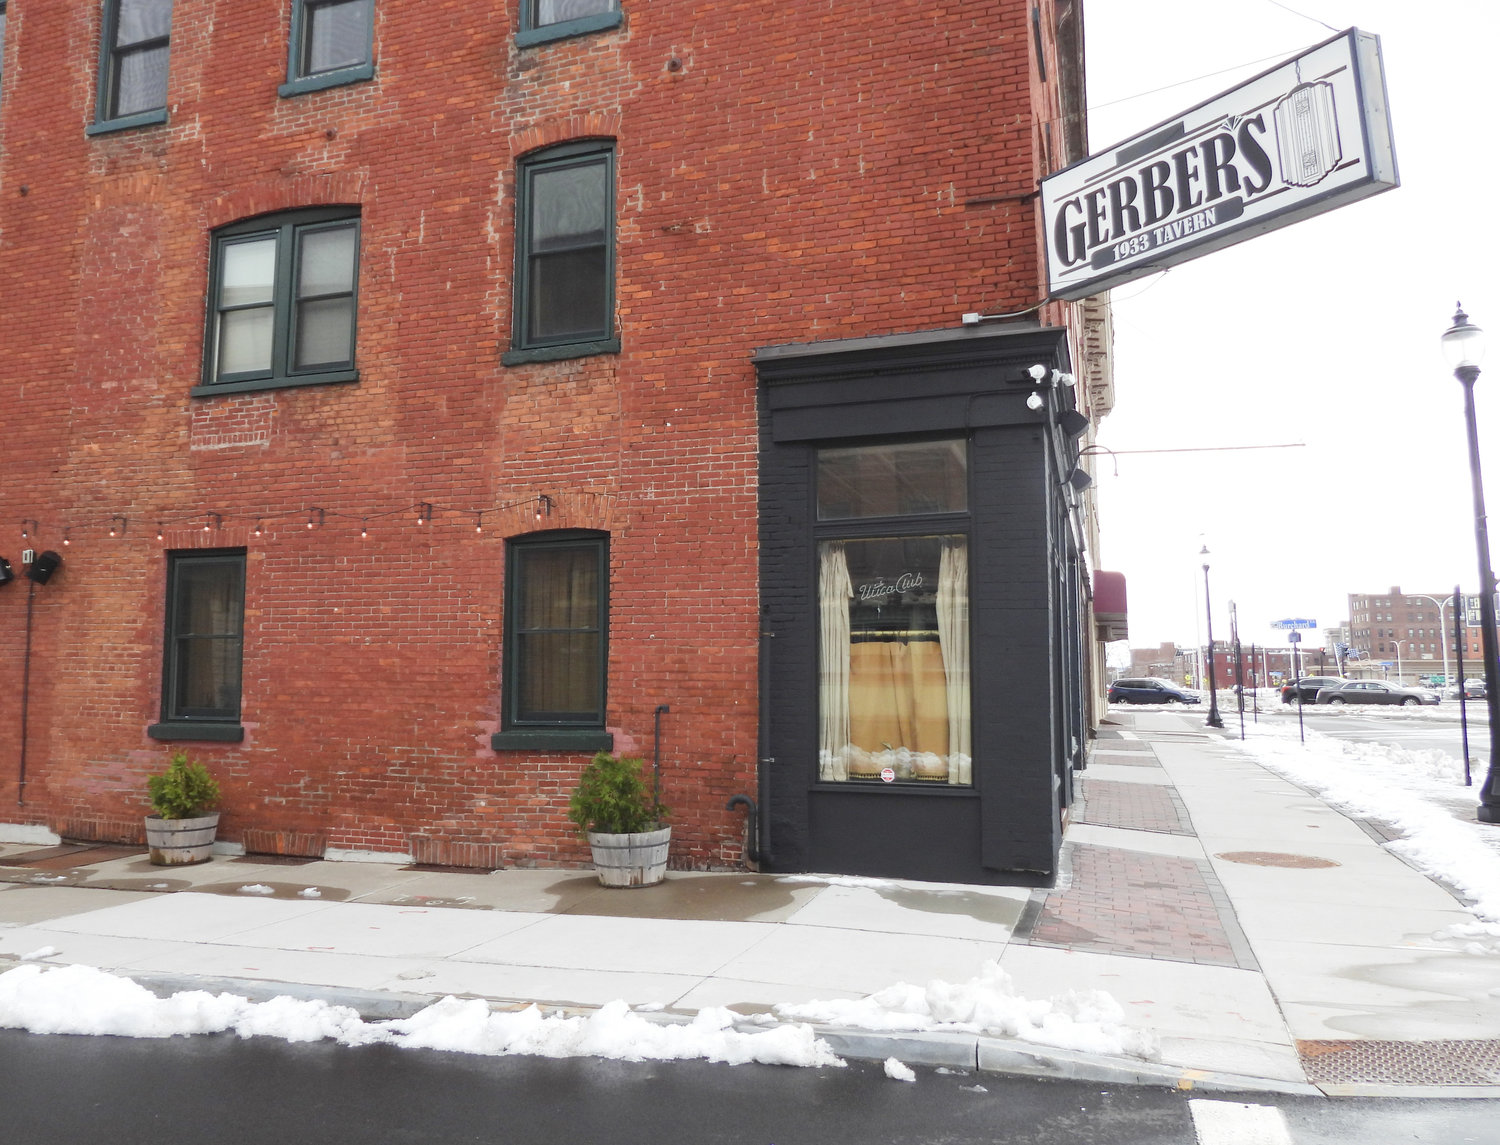 ICONIC — Gerber's 1933 Tavern has been a long-time sight in Bagg's Square, with the original building erected in the 1840s as a warehouse before being converted into a speakeasy during prohibition.